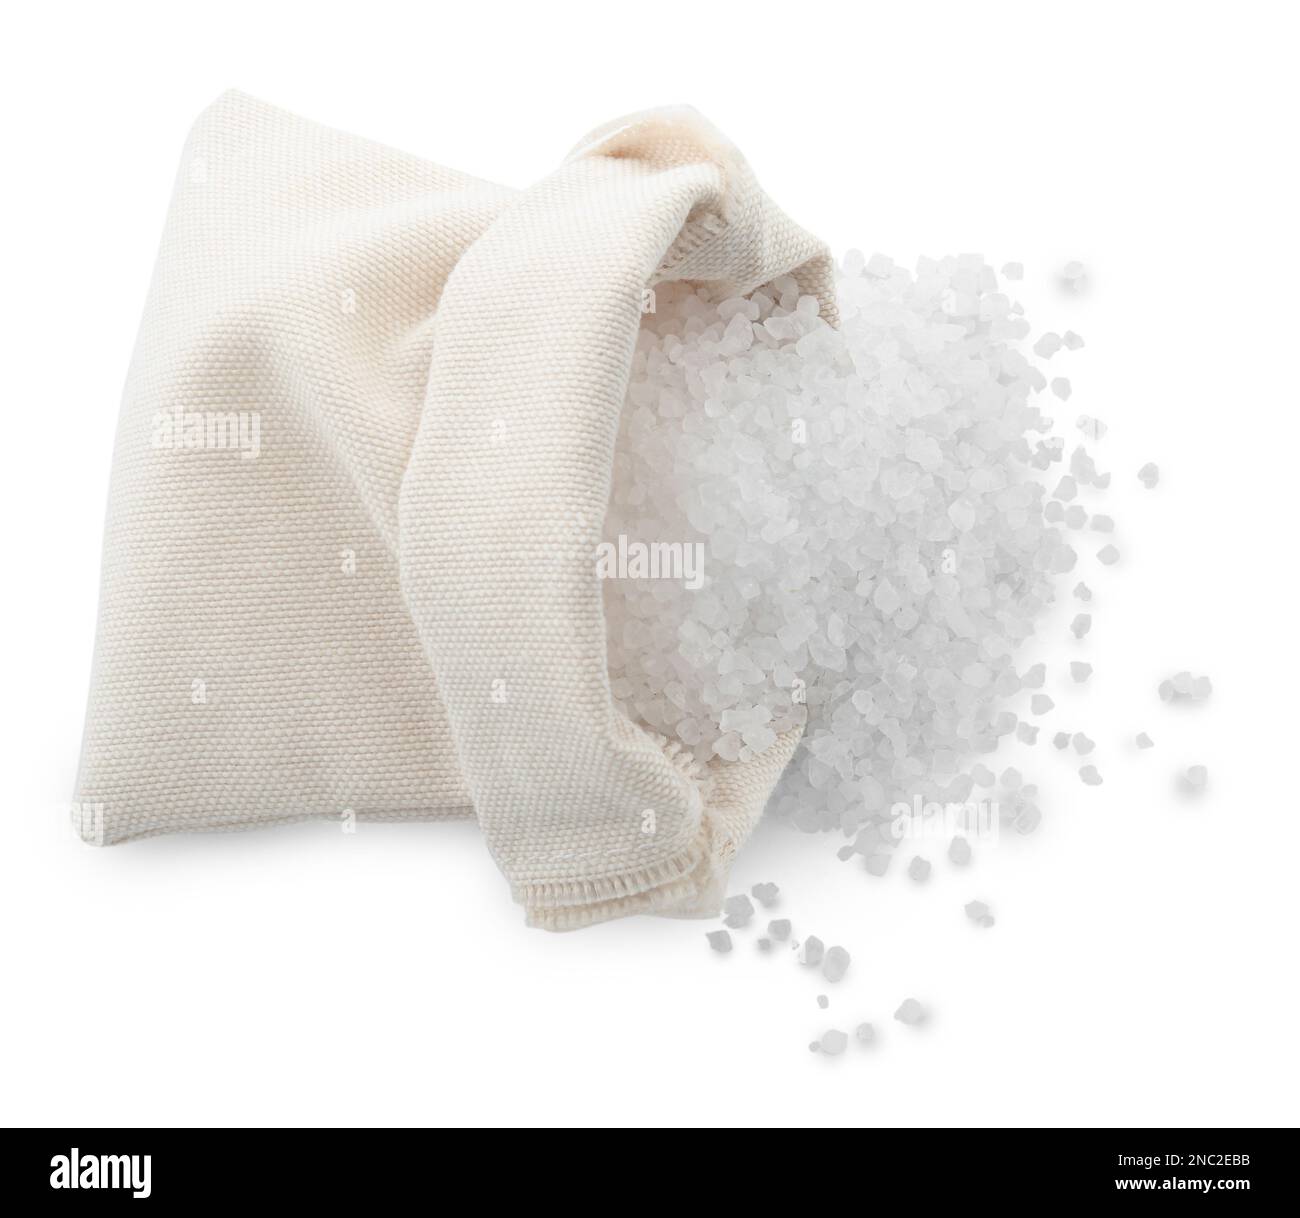 Spice sack Cut Out Stock Images & Pictures - Page 3 - Alamy